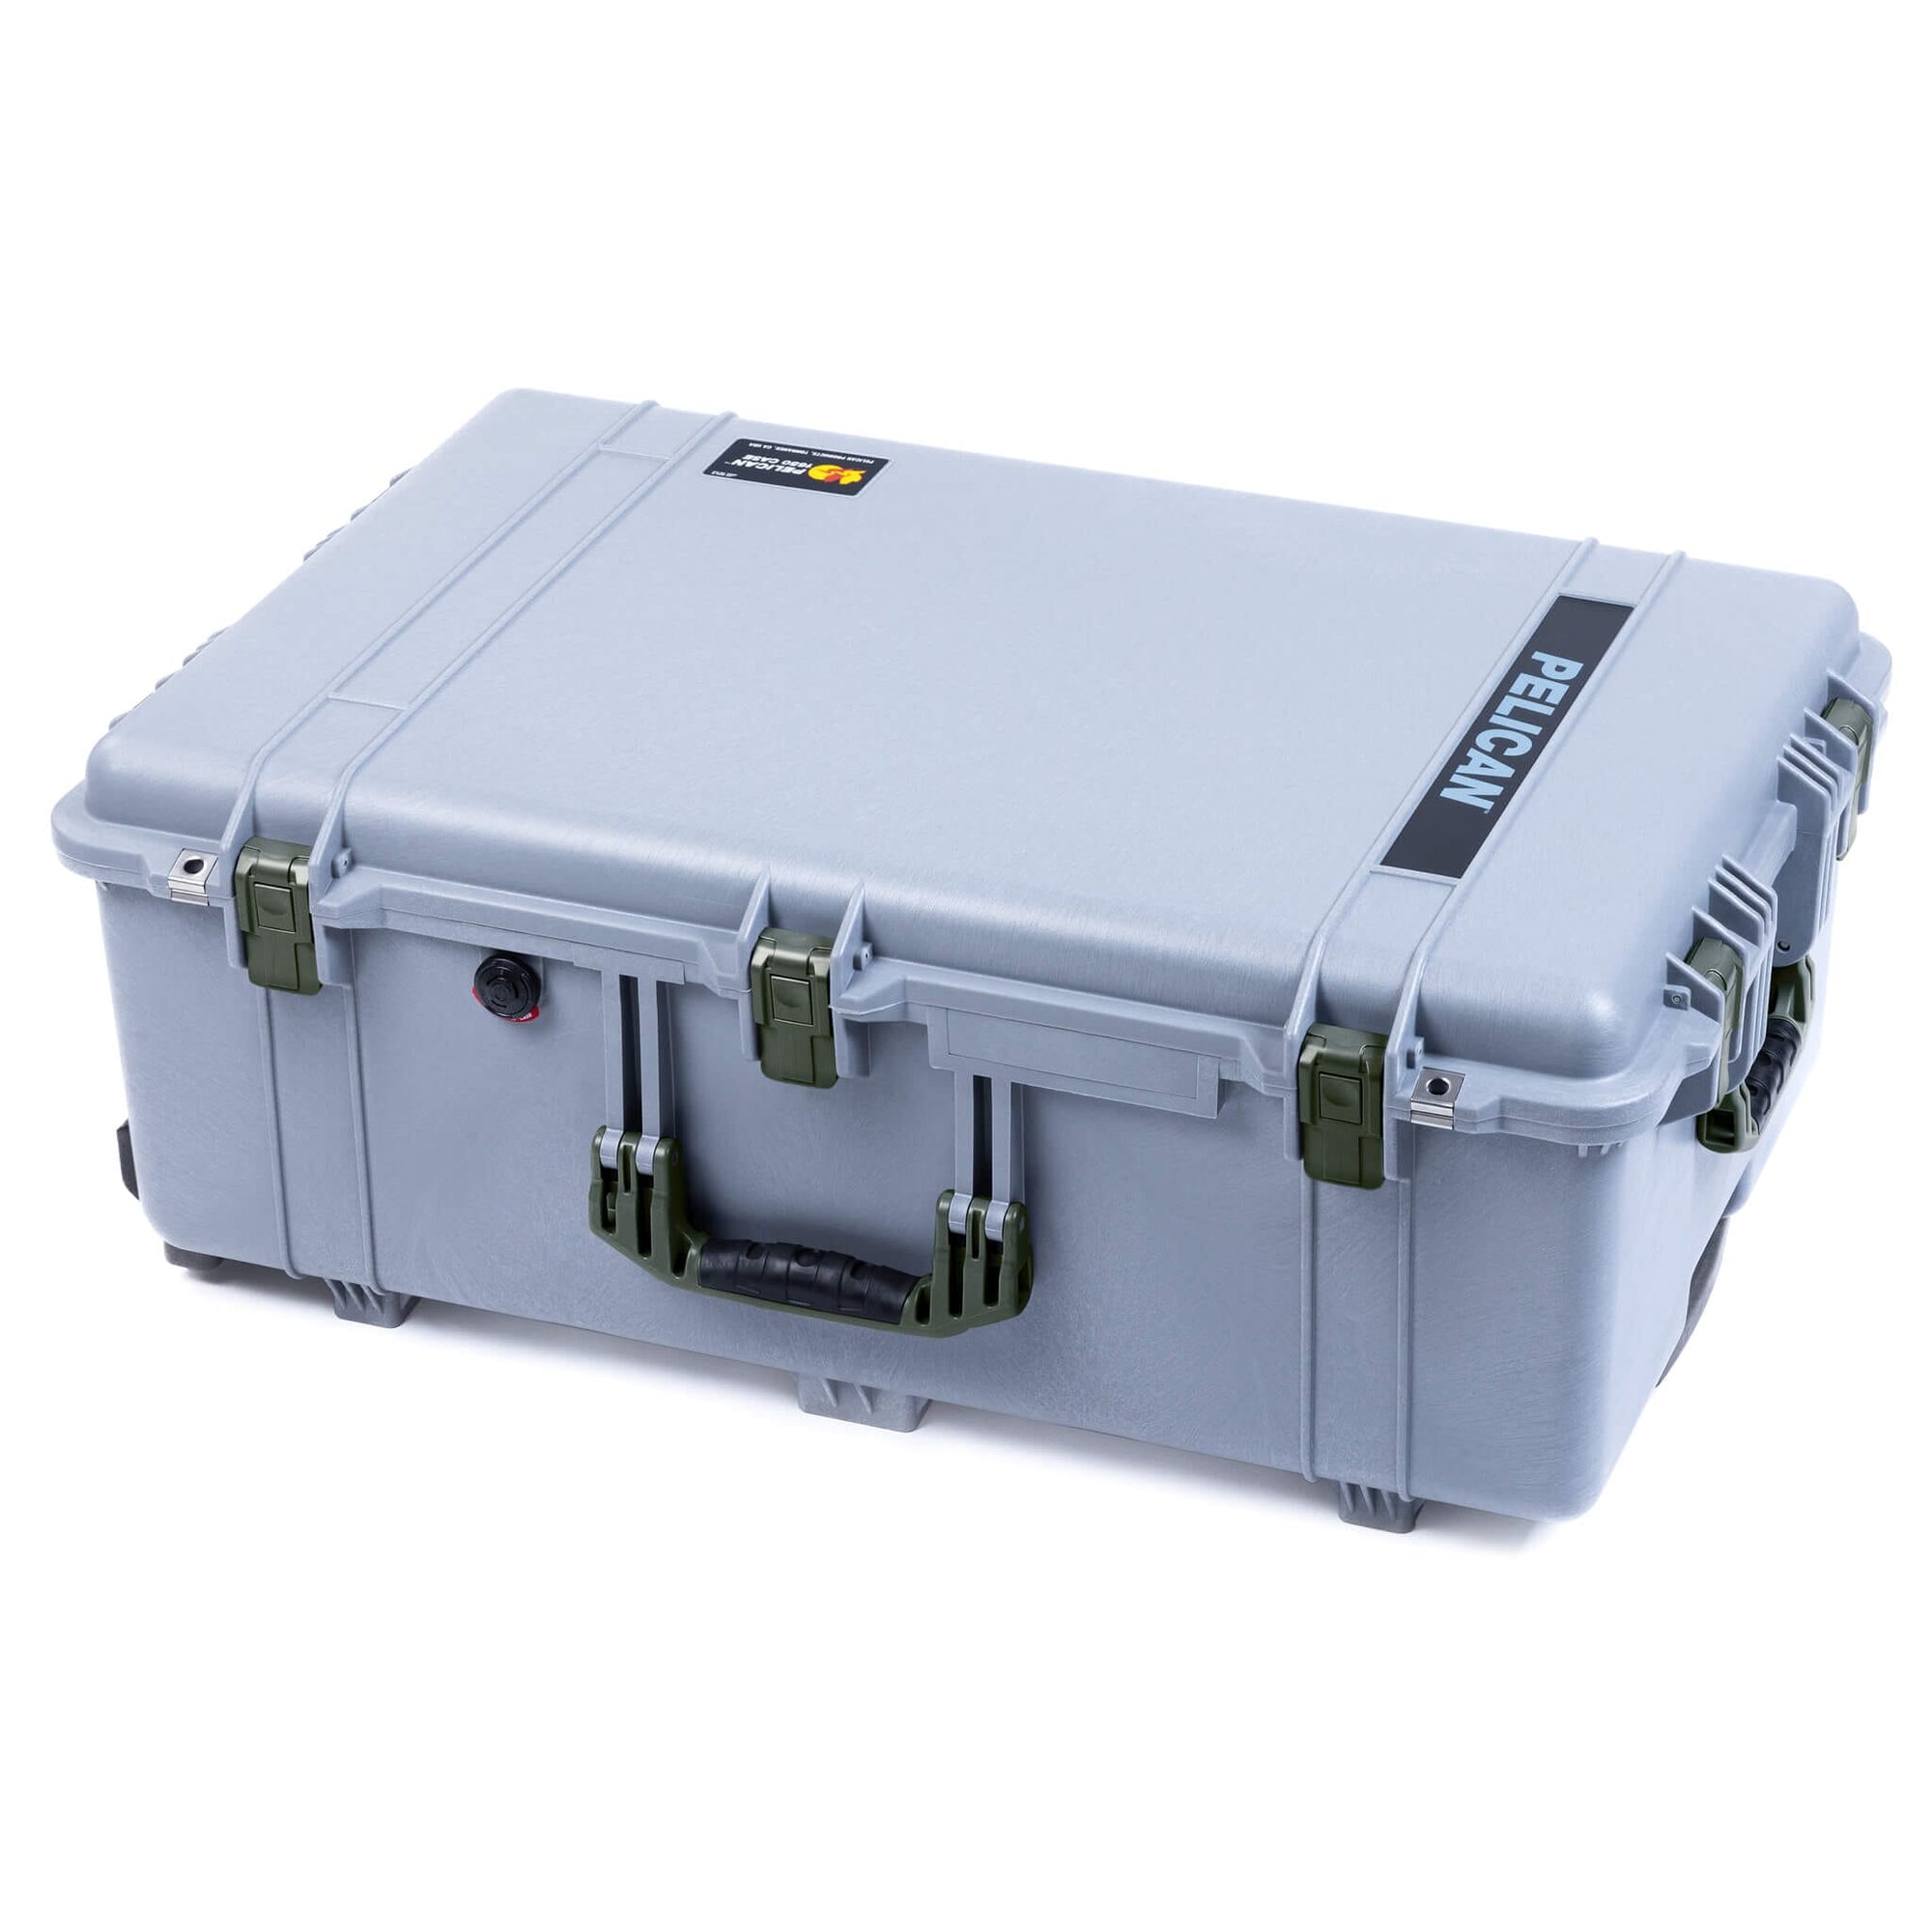 Pelican 1650 Case, Silver with OD Green Handles & Push-Button Latches ColorCase 